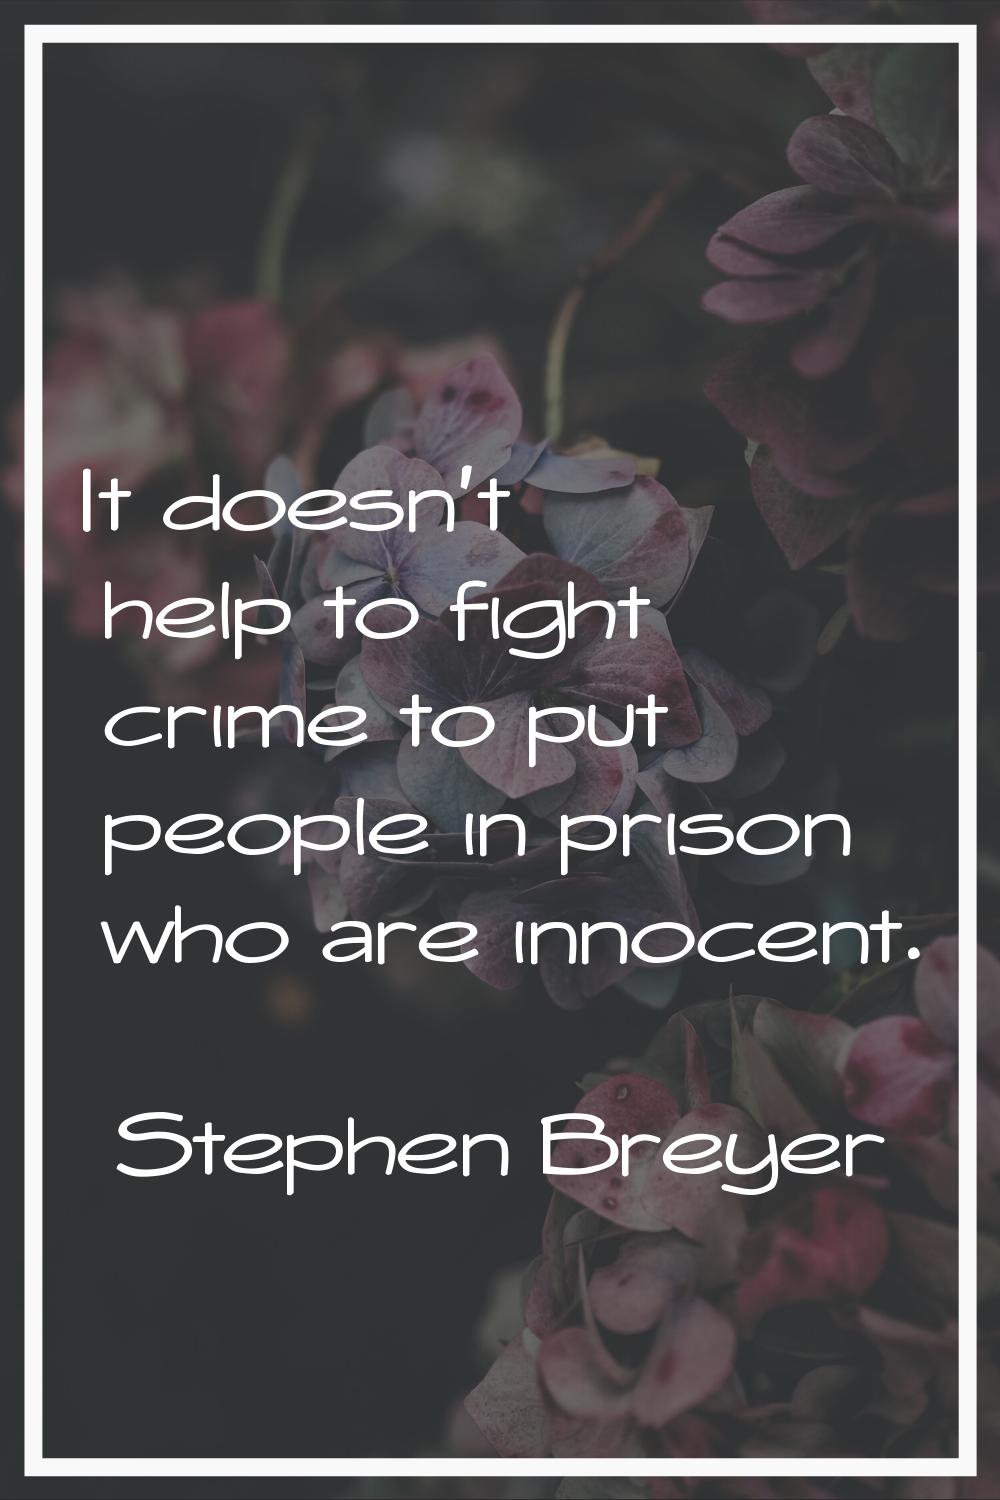 It doesn't help to fight crime to put people in prison who are innocent.